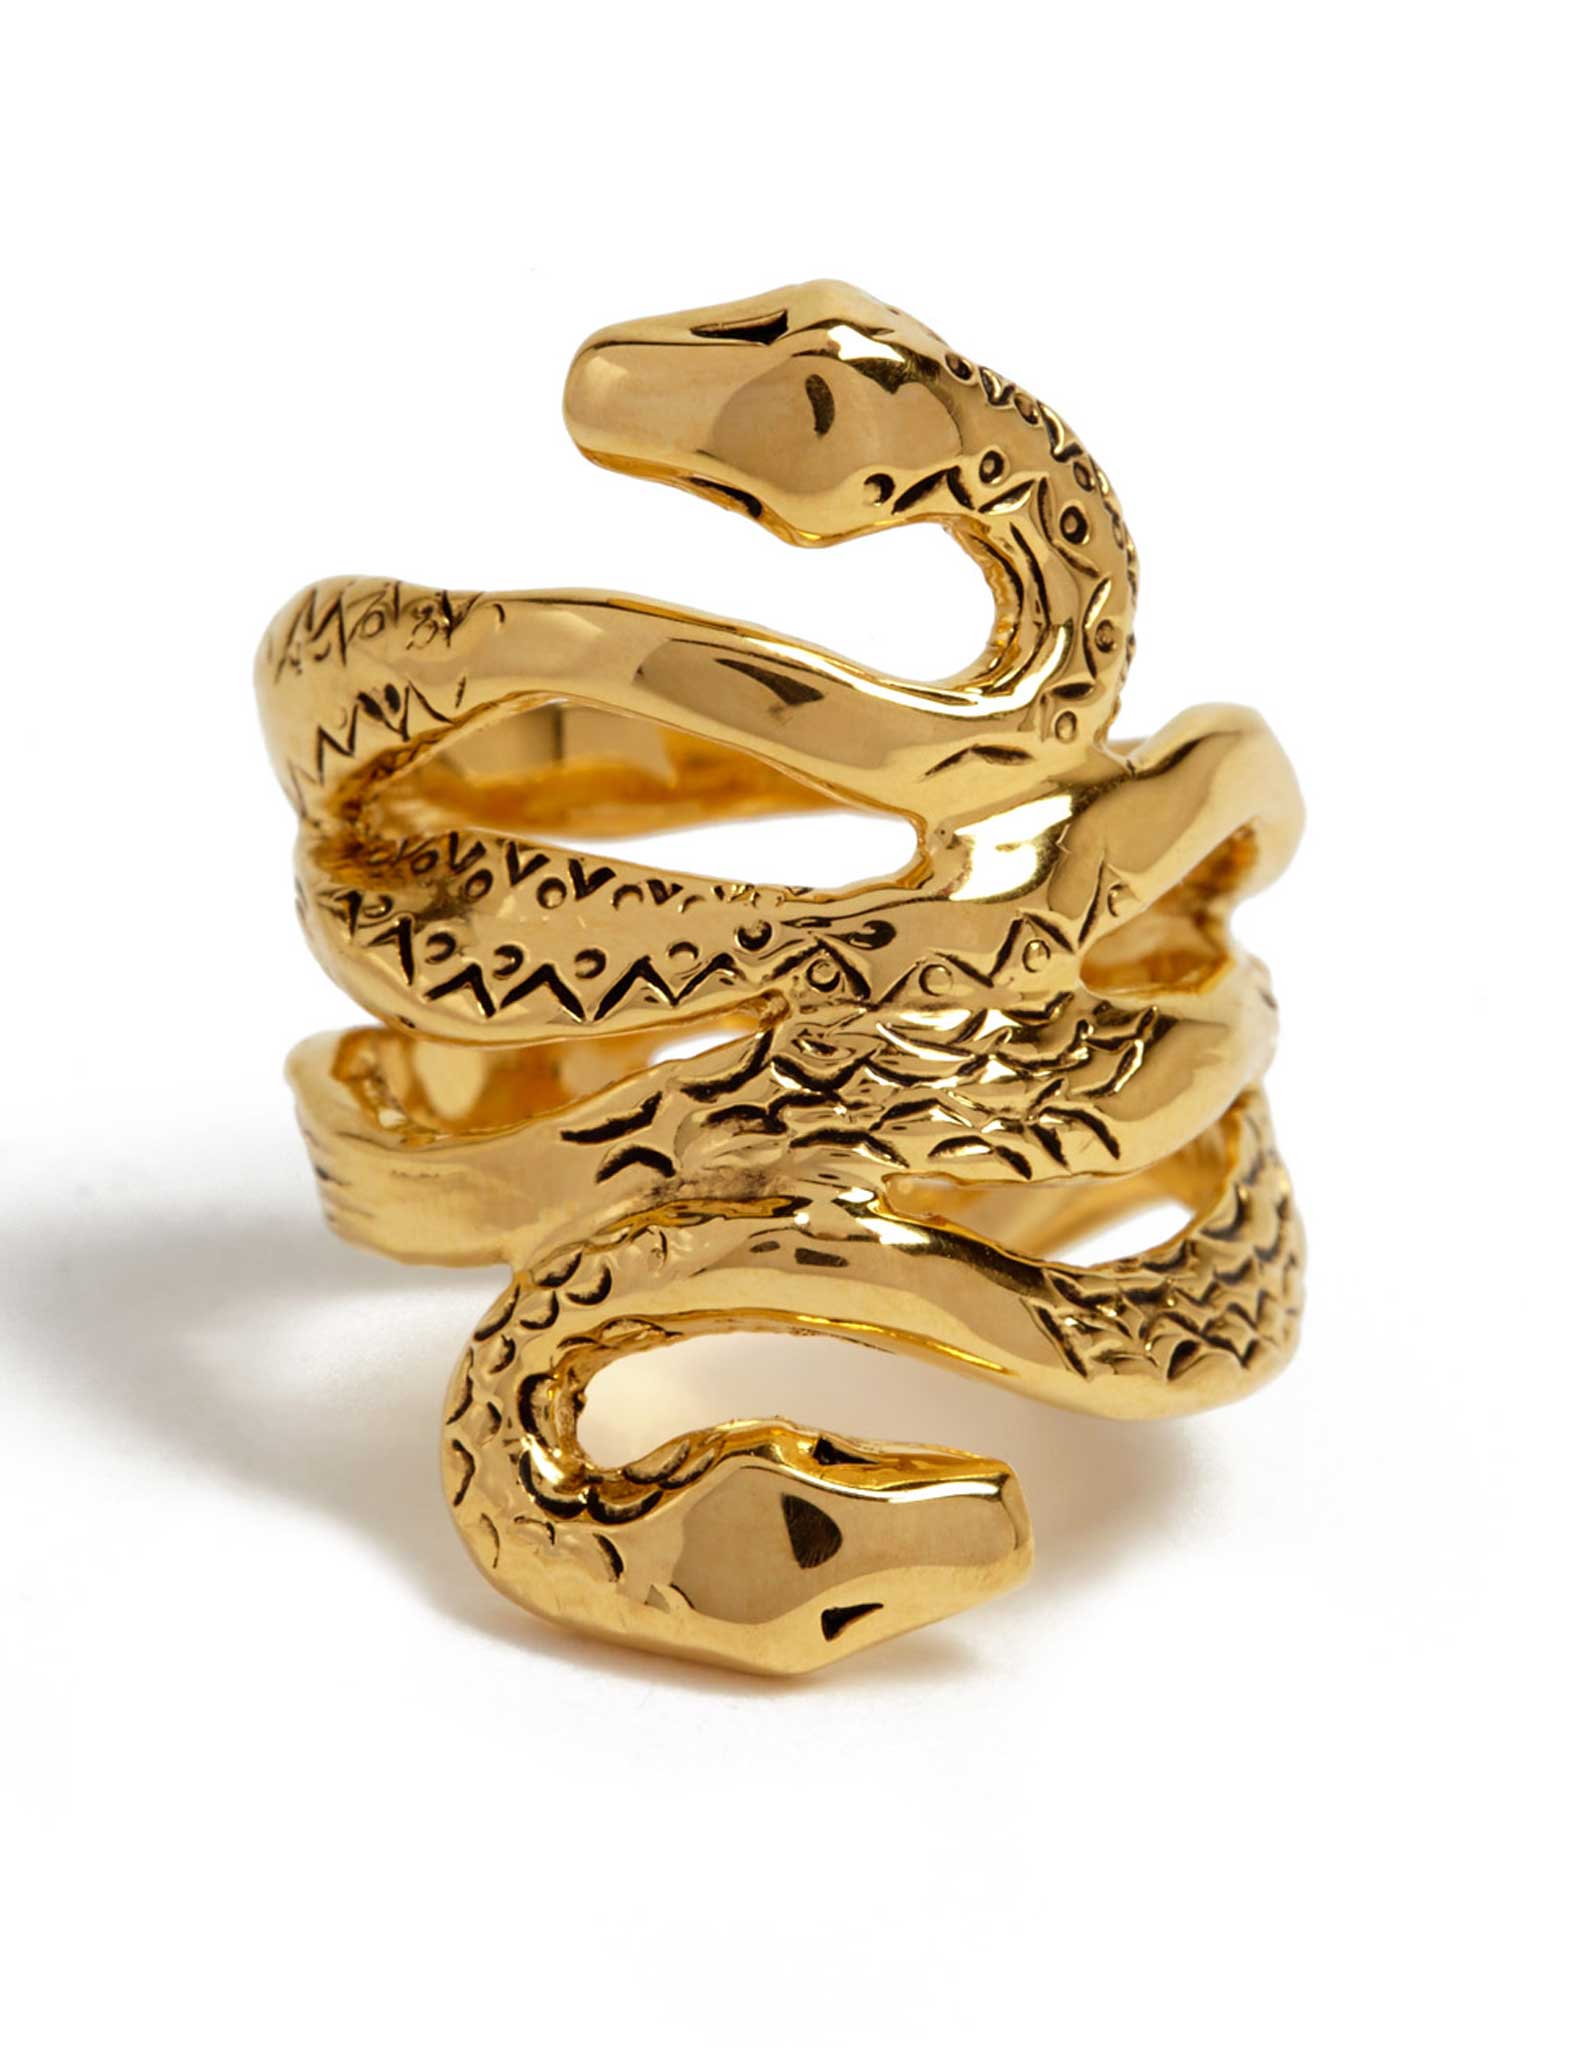 This gold-plated snake design from Aurelie Bidermann is worthy of Cleopatra herself